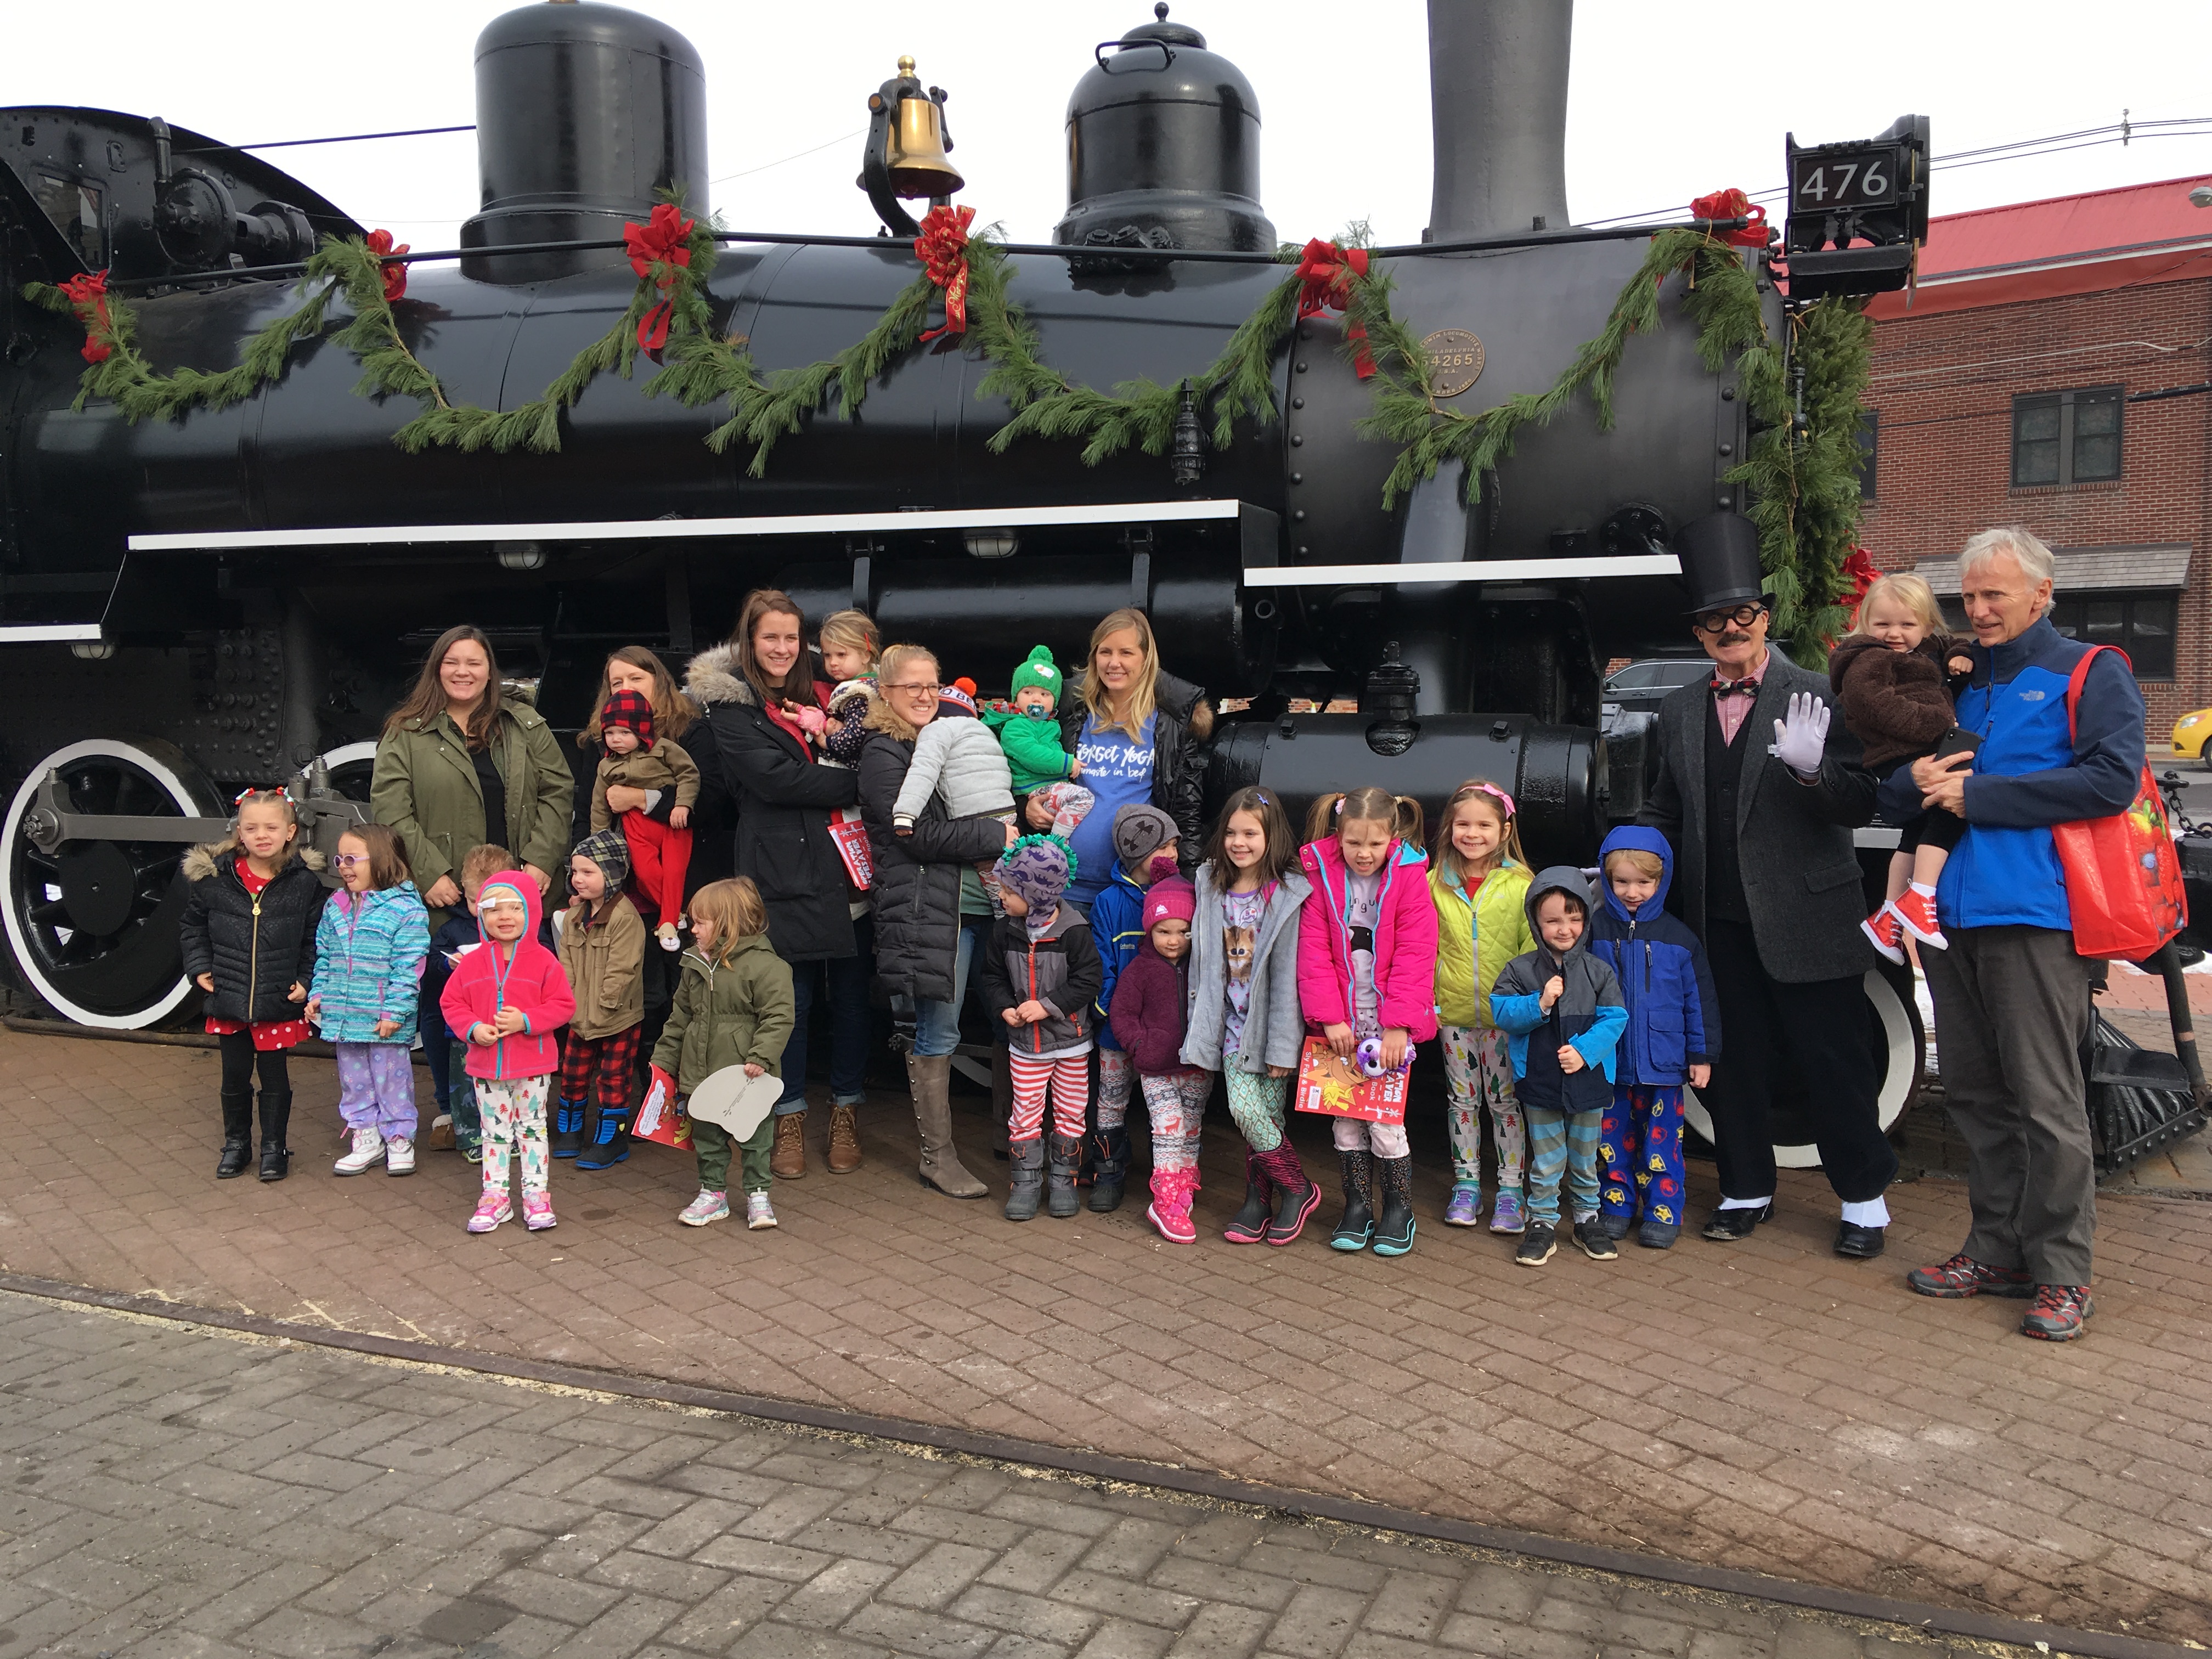 Story Time group standing in front of train